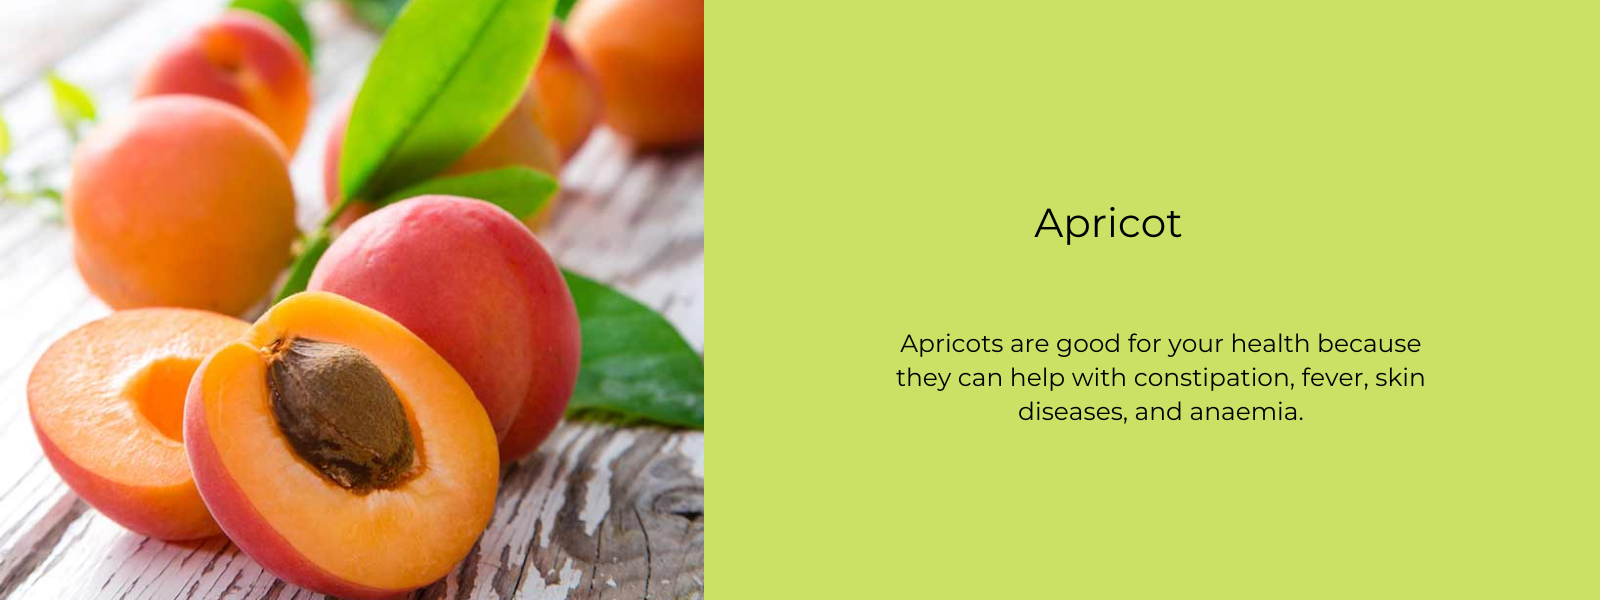 Apricot - Health Benefits, Uses and Important Facts